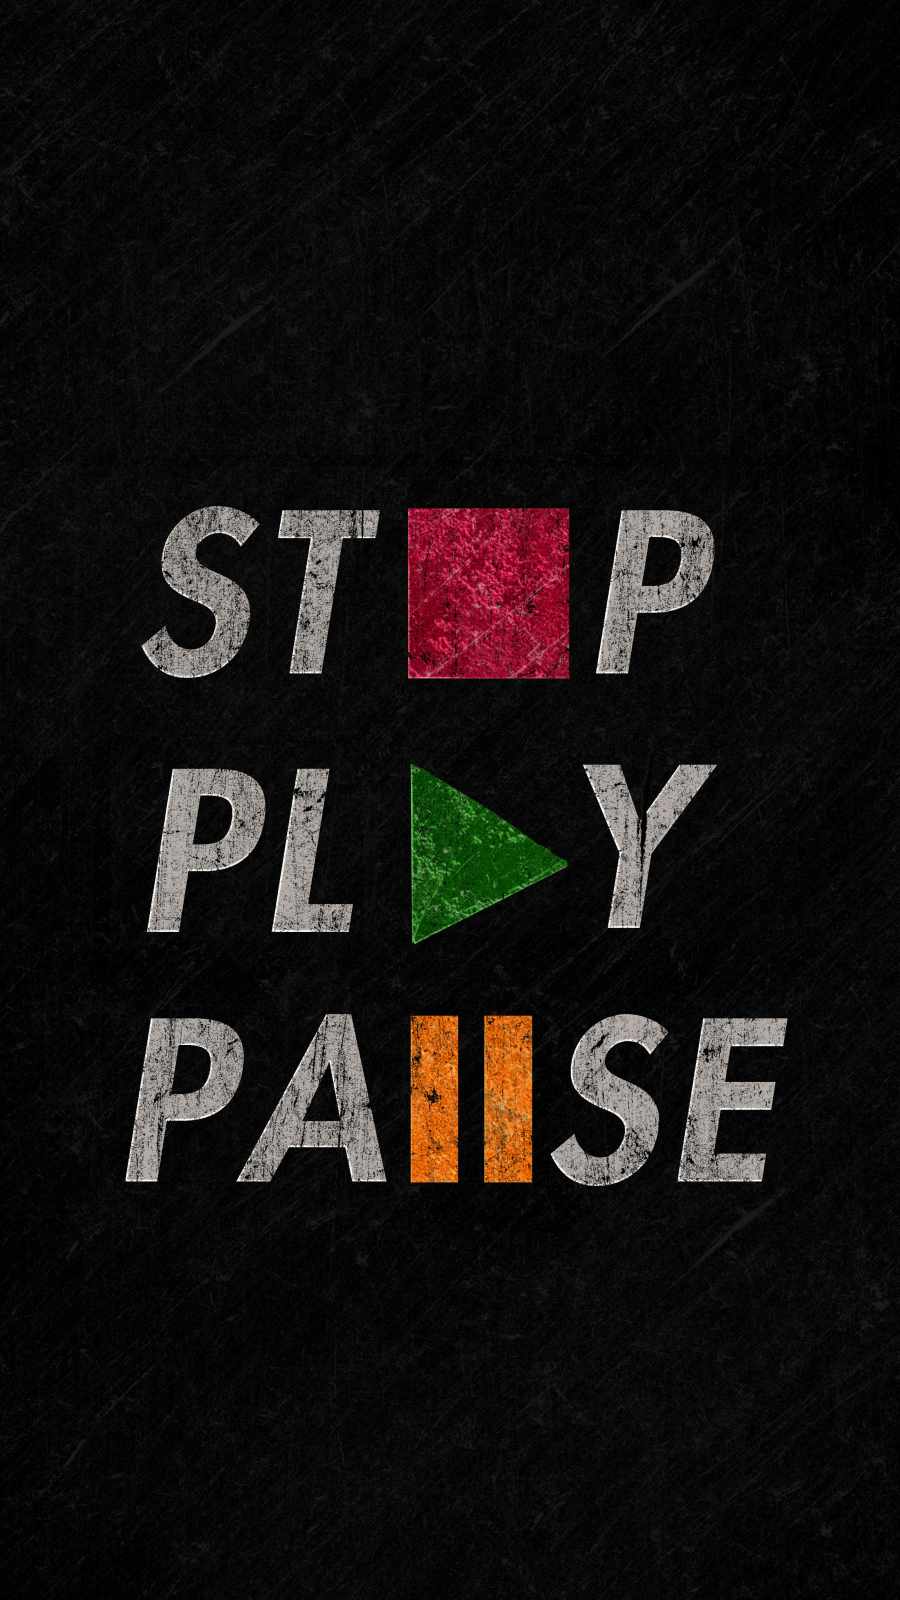 Stop Play Pause IPhone Wallpaper  IPhone Wallpapers